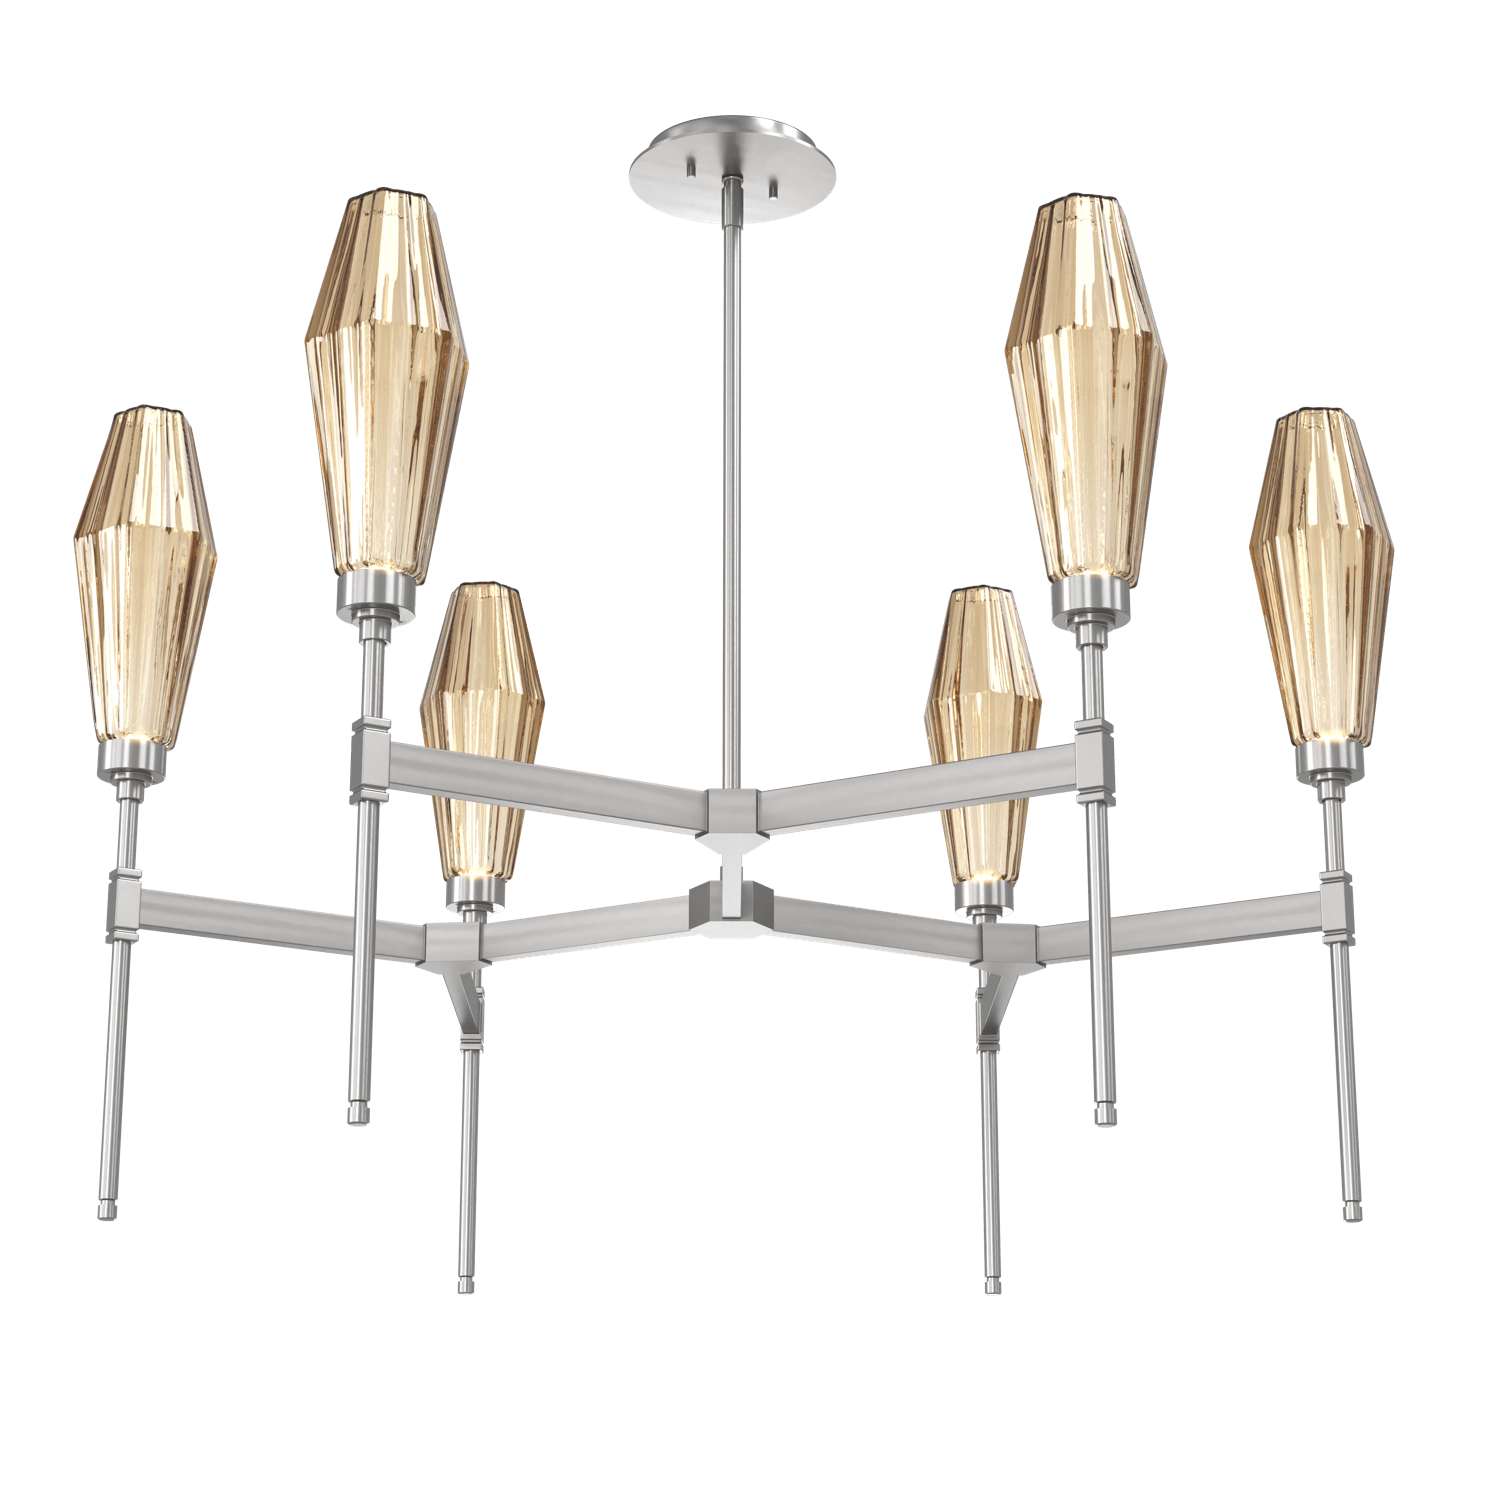 CHB0049-37-SN-RB-Hammerton-Studio-Aalto-37-inch-round-belvedere-chandelier-with-satin-nickel-finish-and-optic-ribbed-bronze-glass-shades-and-LED-lamping